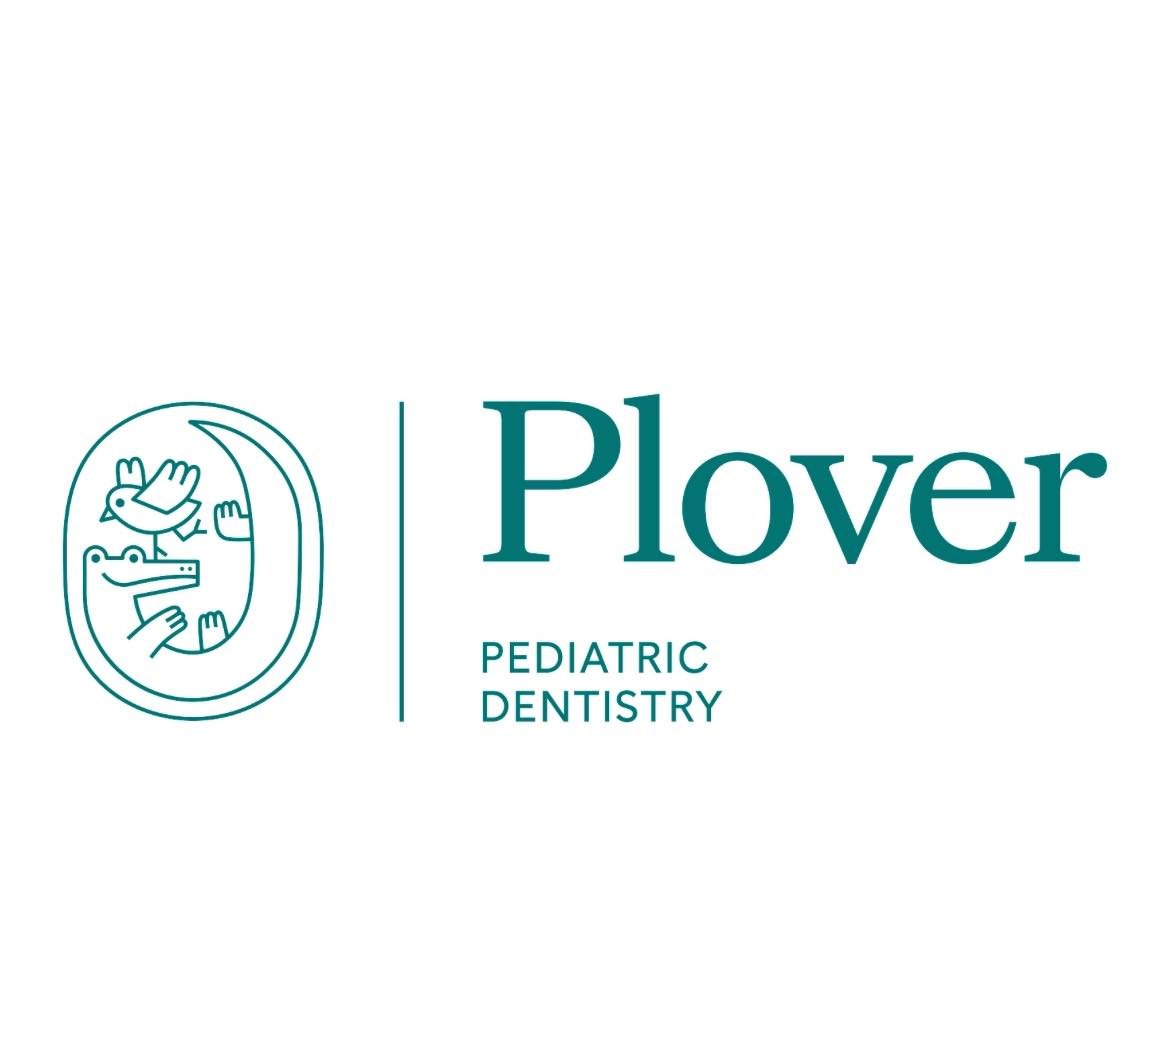 Shout out to this year&rsquo;s Spring Fling sponsor @ploverpediatricdentistry

Check their profile to learn more!